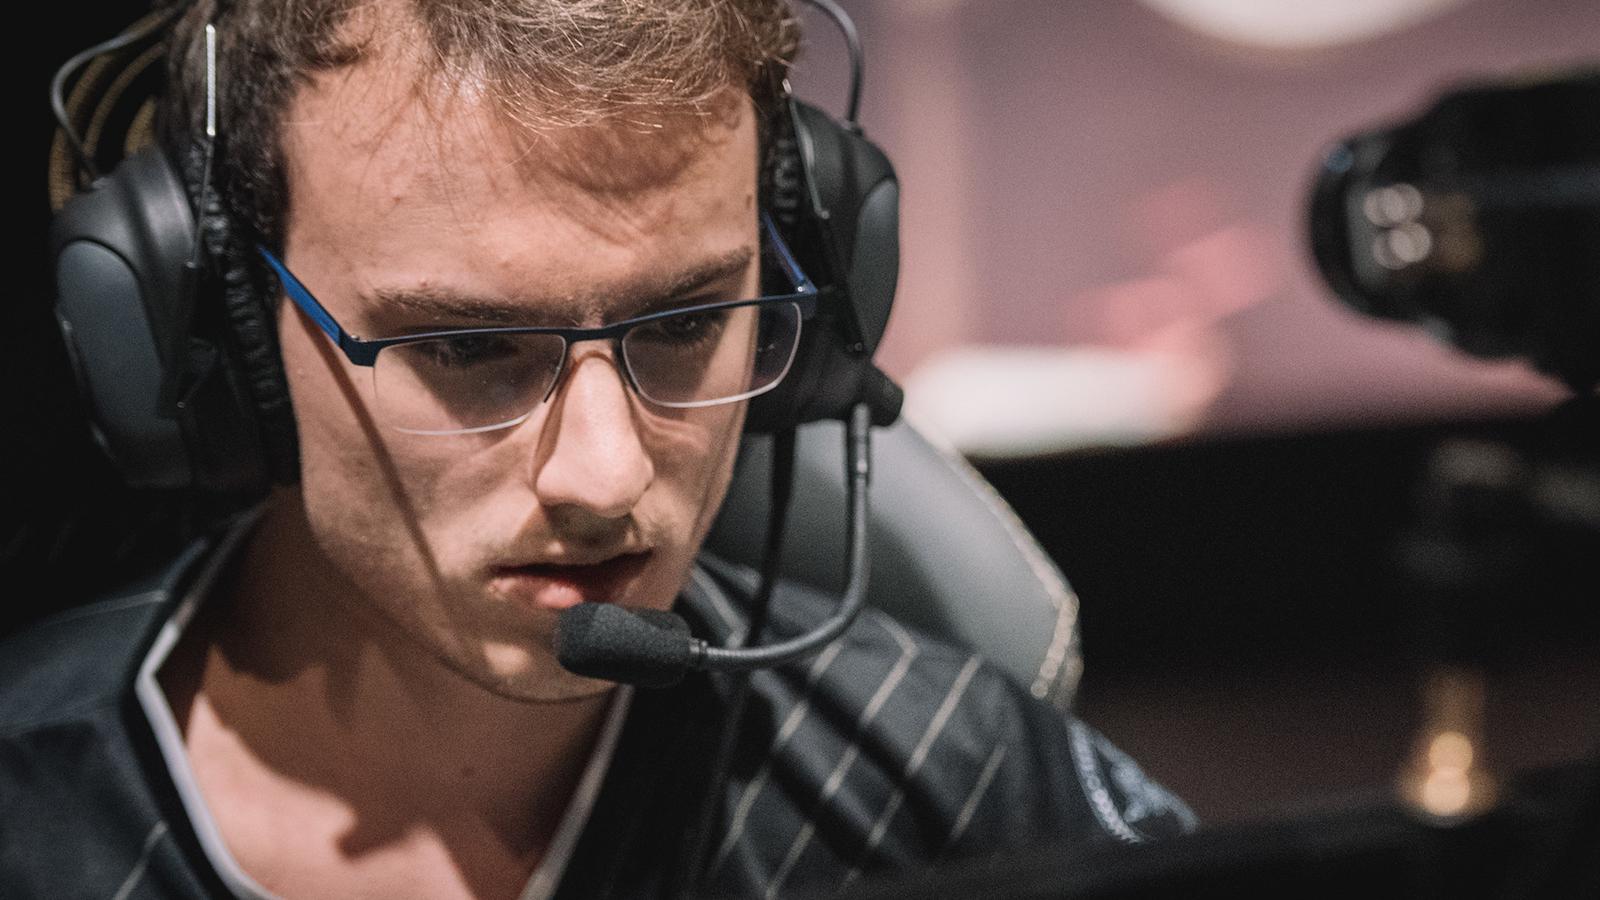 Perkz players on stage for G2 Esports at MSI 2019.